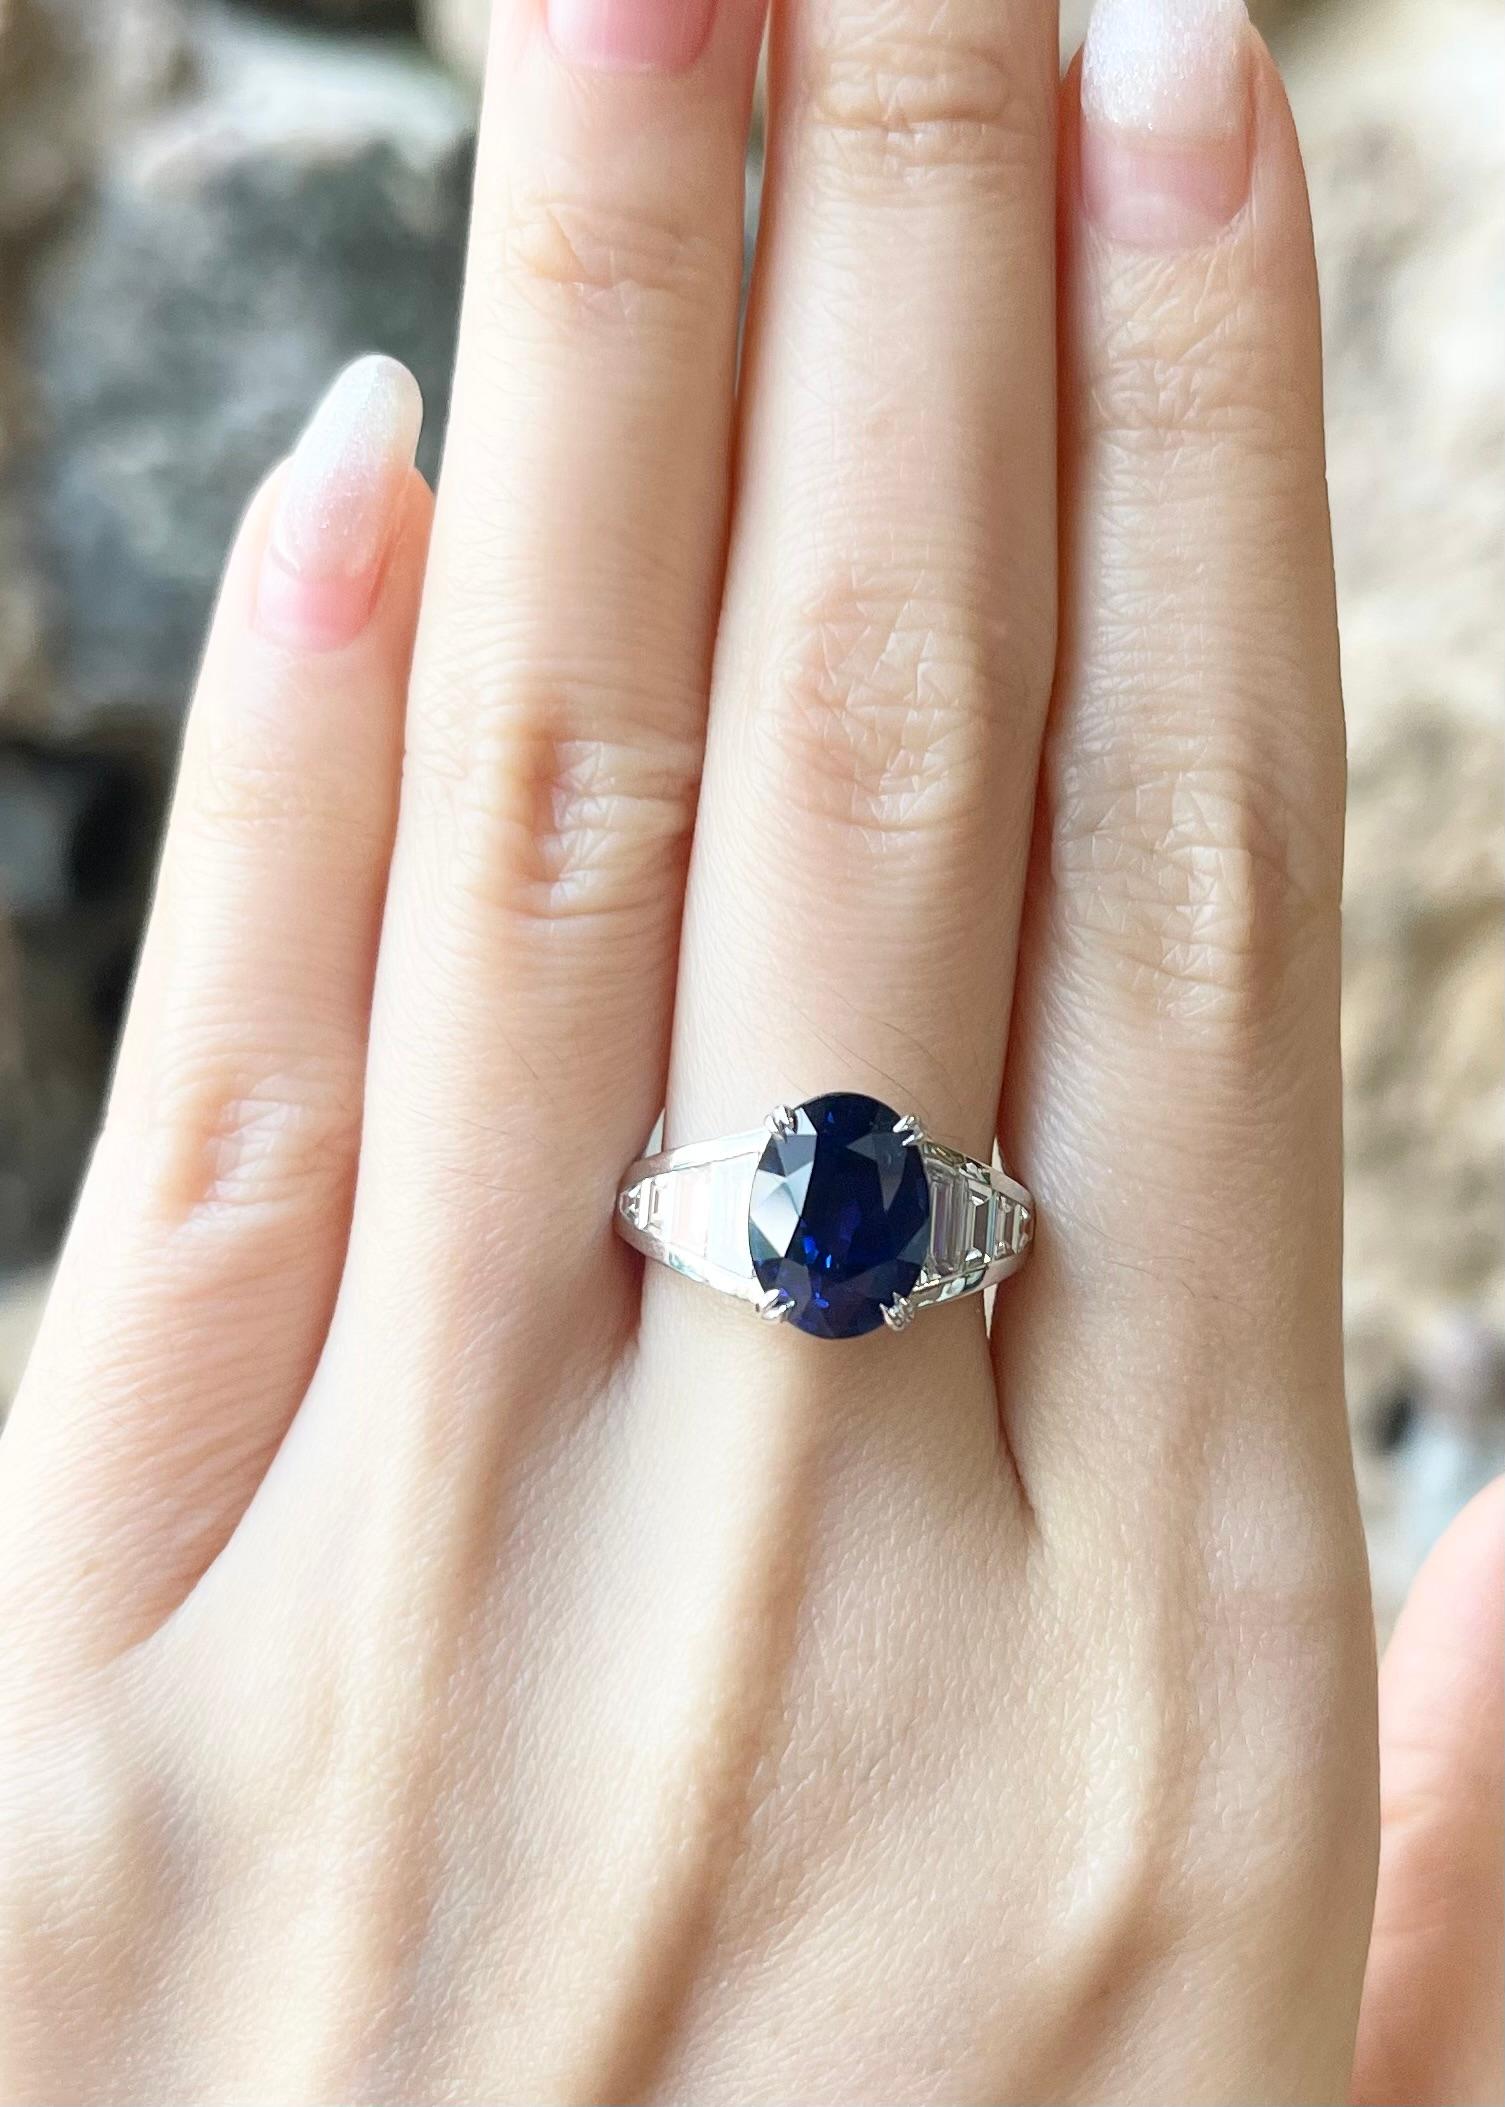 Contemporary Royal Blue Sapphire with Diamond Ring set in Platinum 950 Settings For Sale